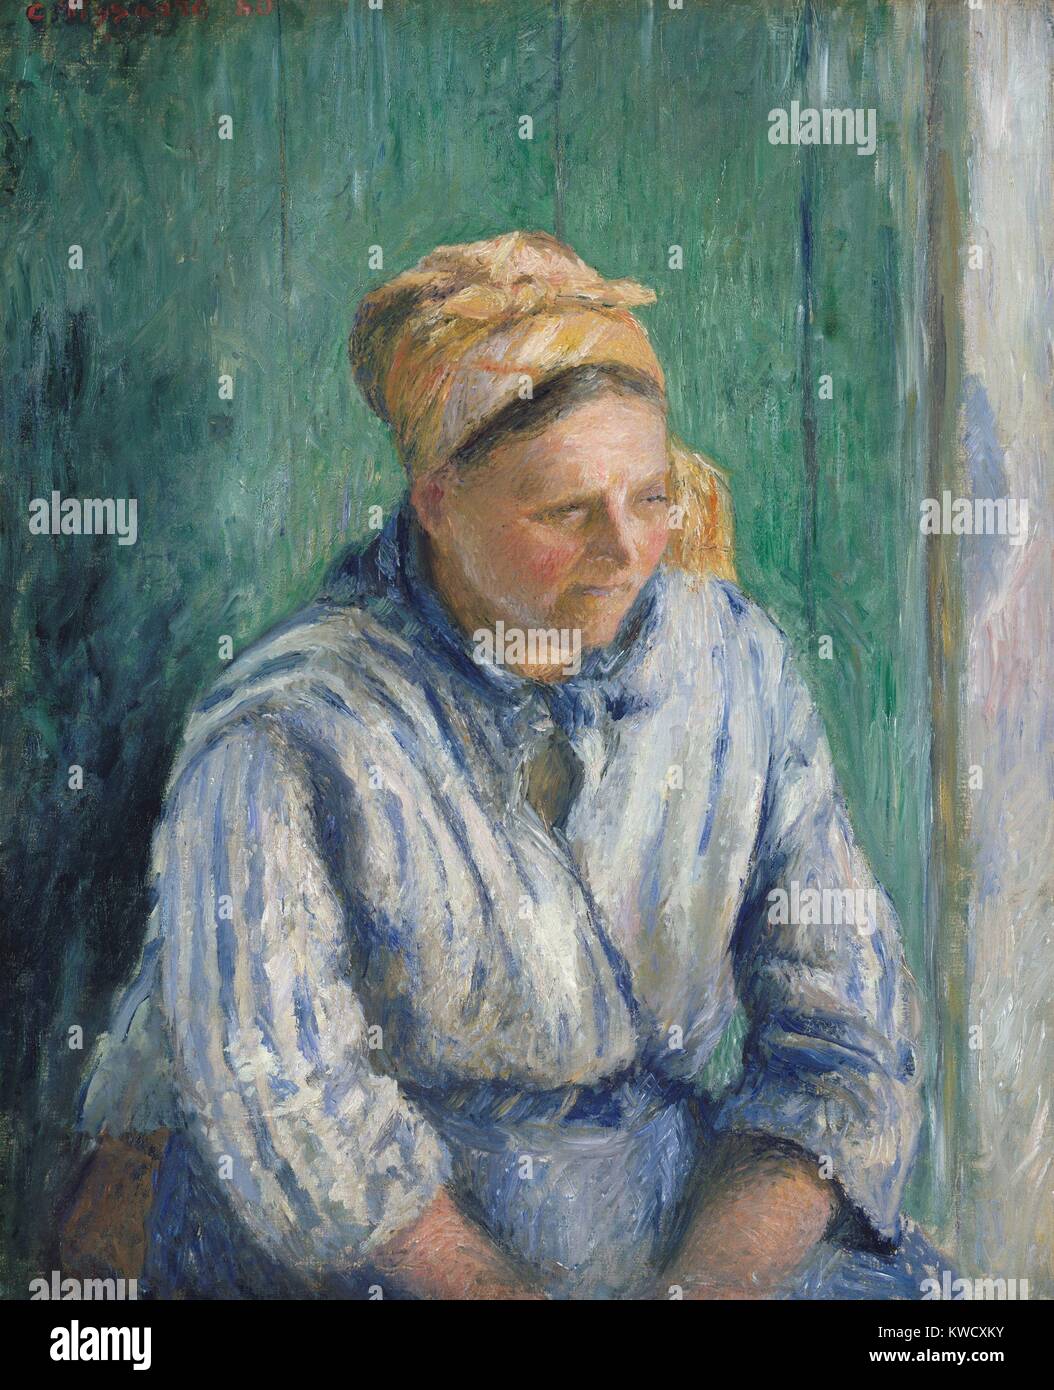 Washerwoman, Study, by Camille Pissarro, 1880, French impressionist painting, oil on canvas. The woman was one of Pissarros Pontoise neighbors, a fifty-six-year-old mother of four named Marie Larcheveque (BSLOC 2017 3 57) Stock Photo